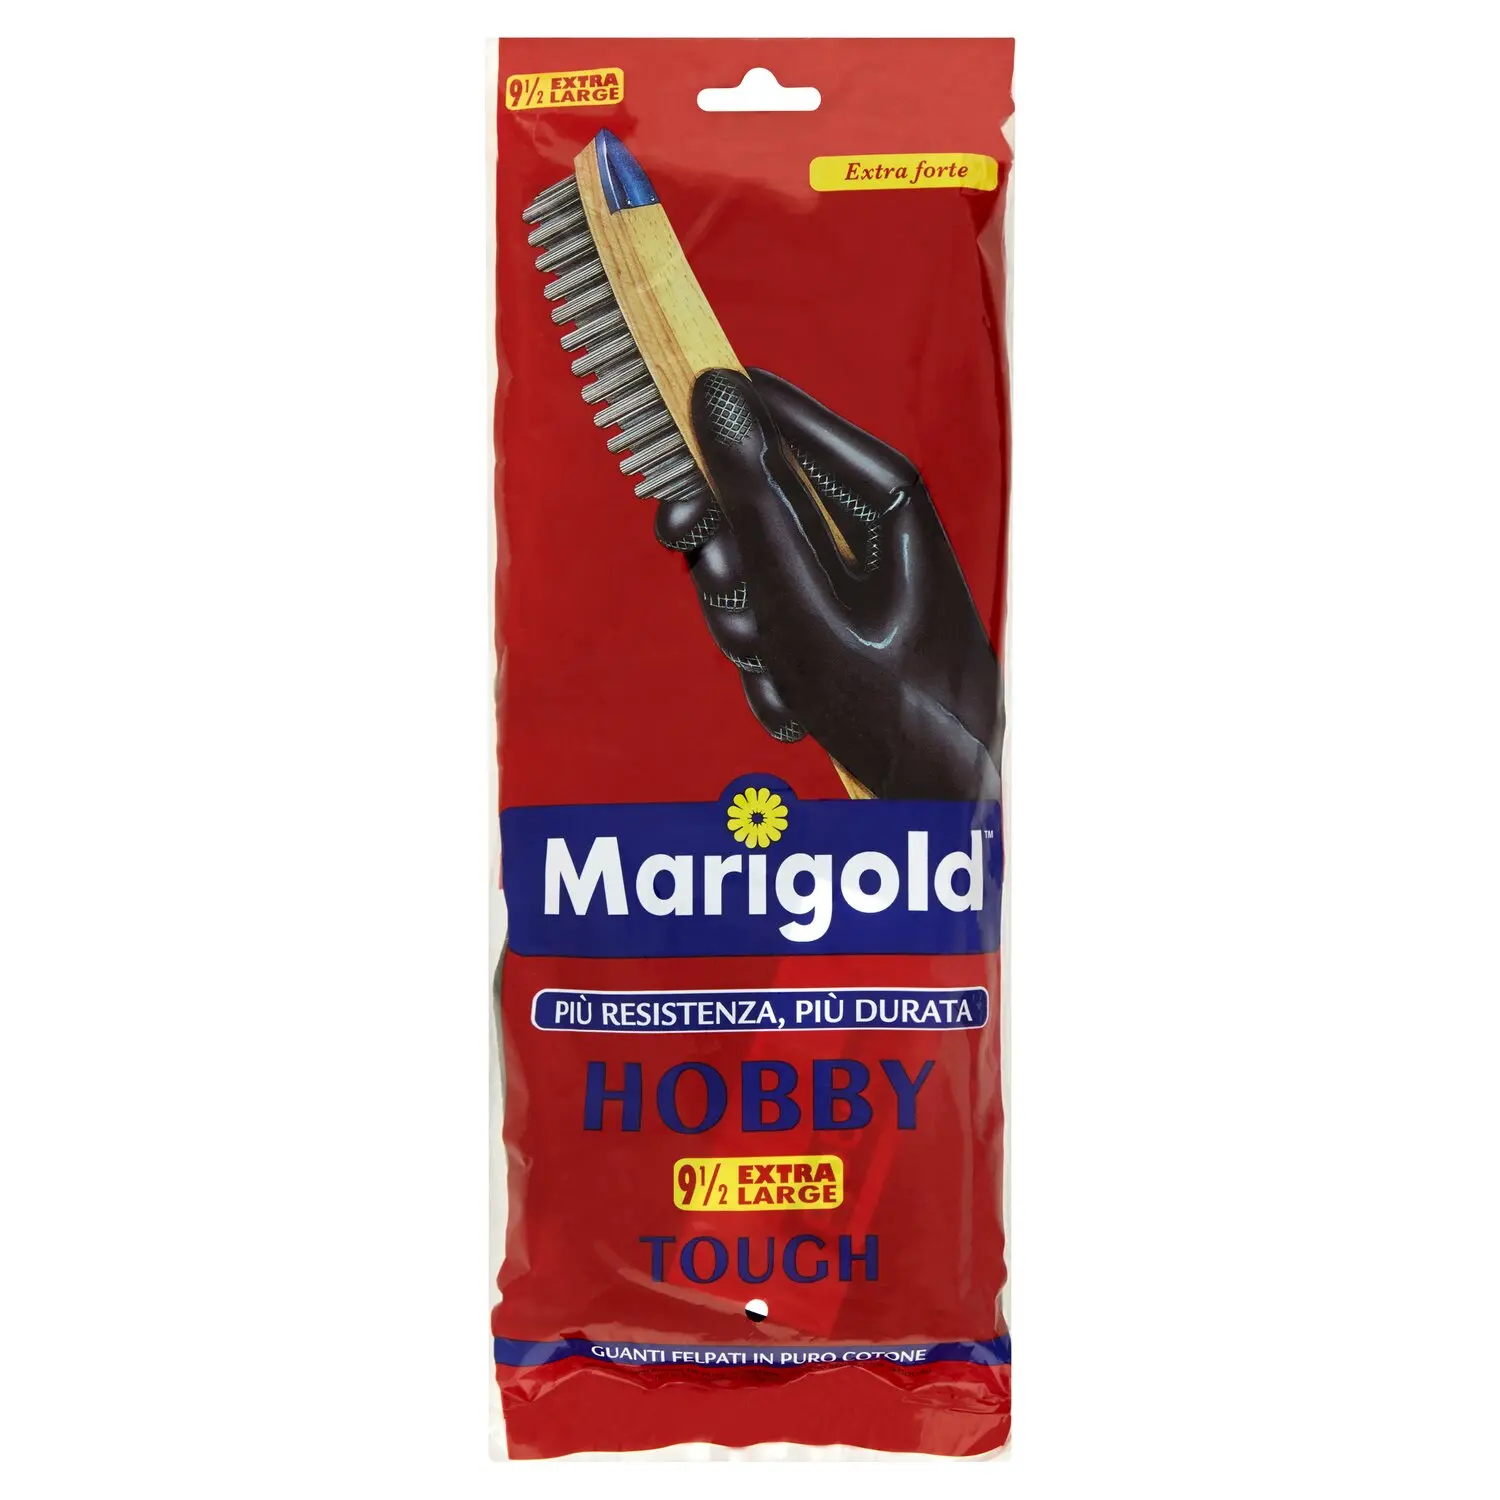 Marigold Hobby touch 9½ extra large